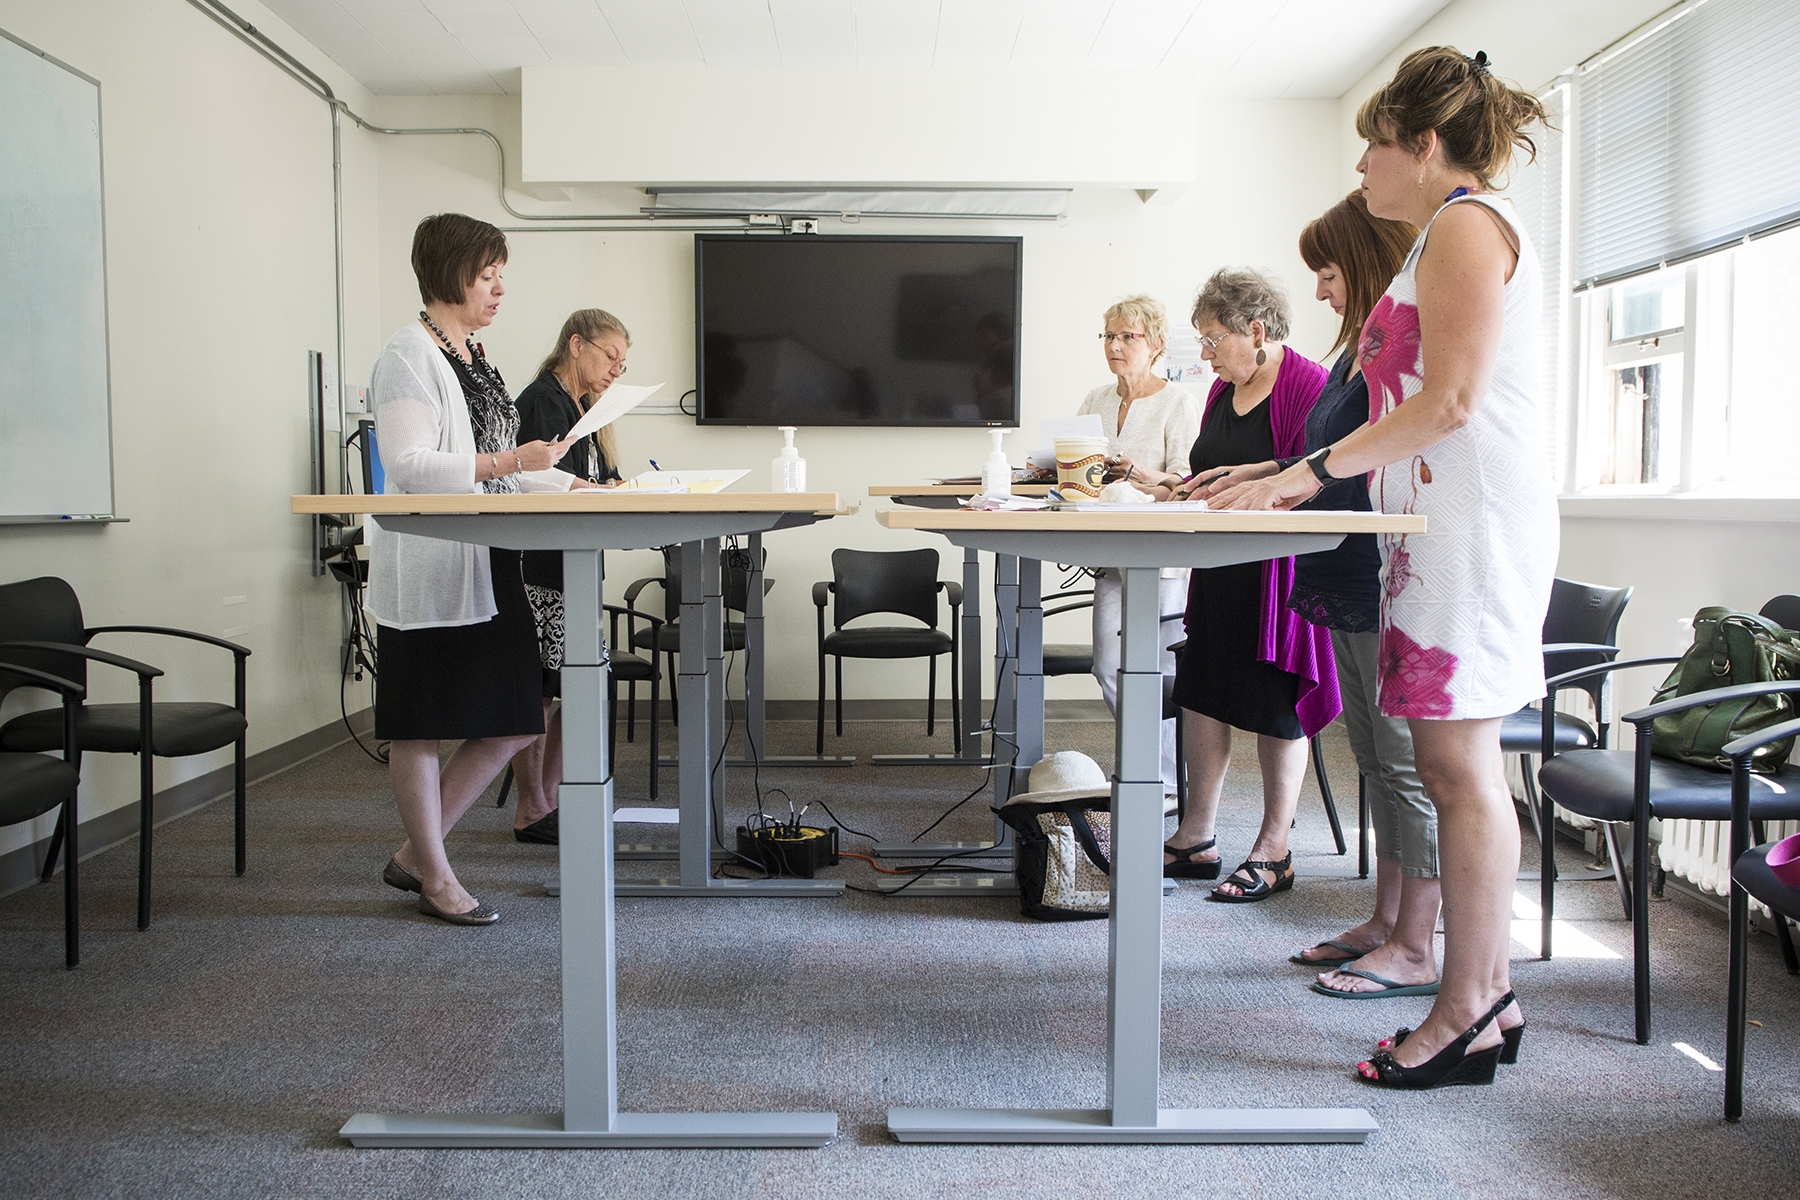  The Dietary 2 conference room is the scene of a new style of meeting where chairs are pushed aside.